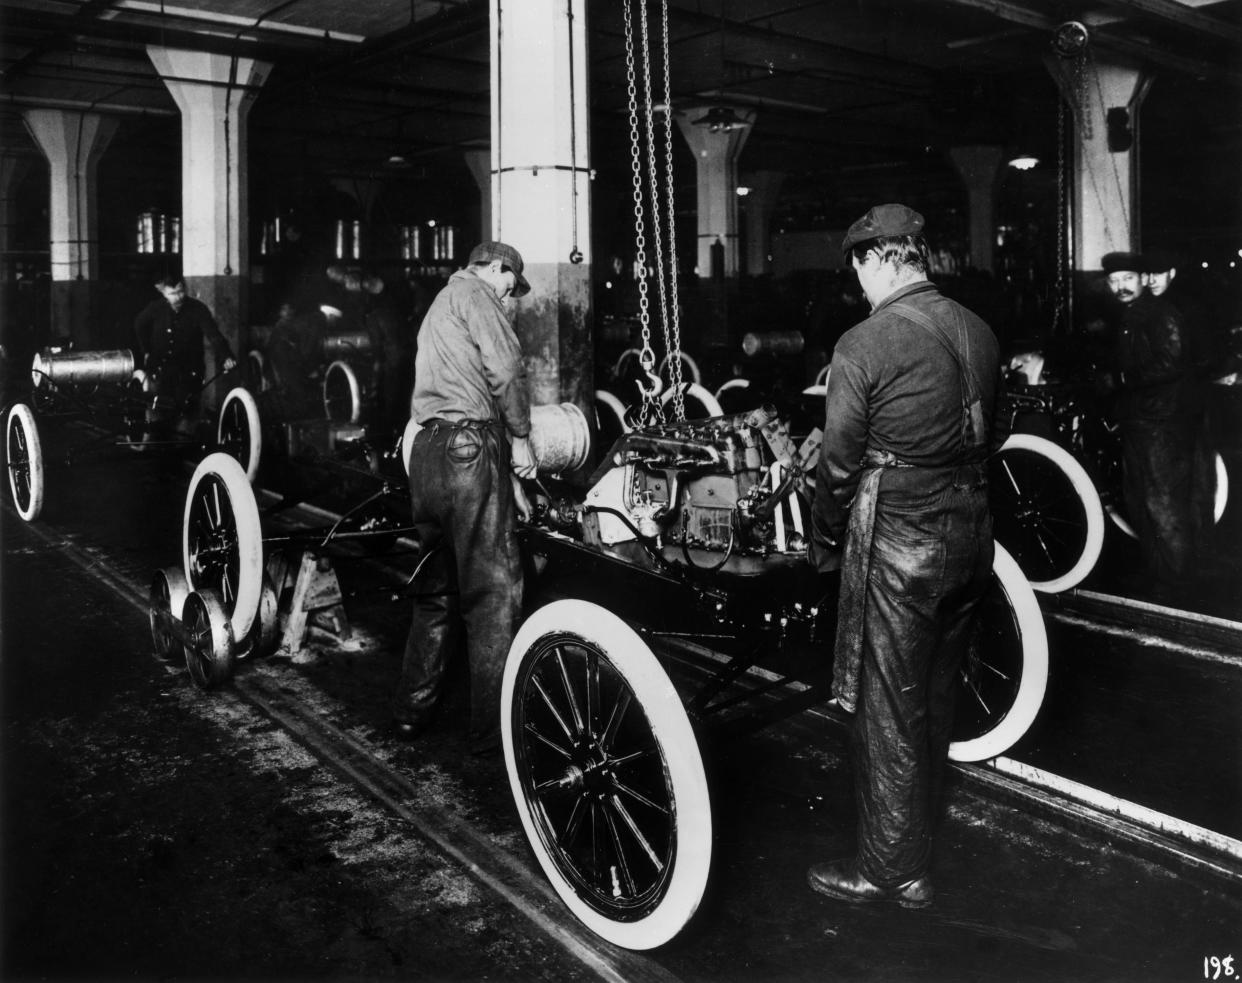 1914: Workers constructing a Model-T engine on an assembly line in a Ford Motor Company factory.